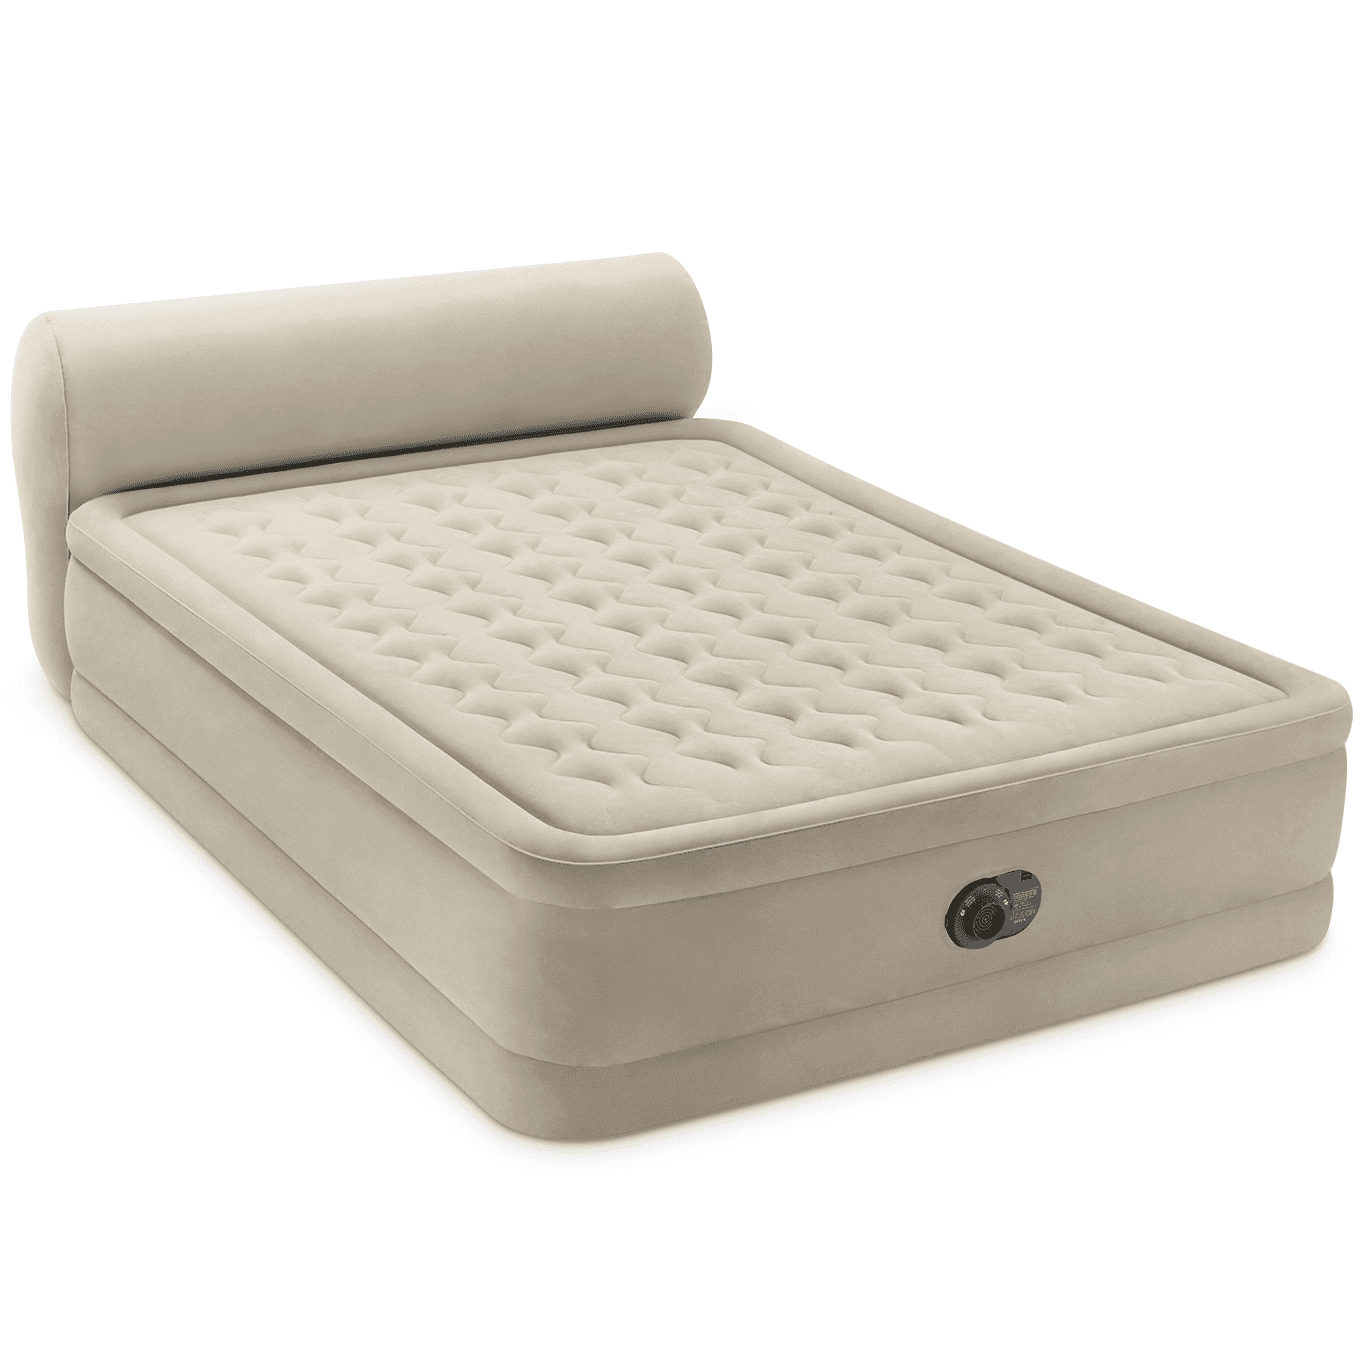 INTEX Queen Inflatable Air Bed with Electric Pump Double Airbed Mattress 